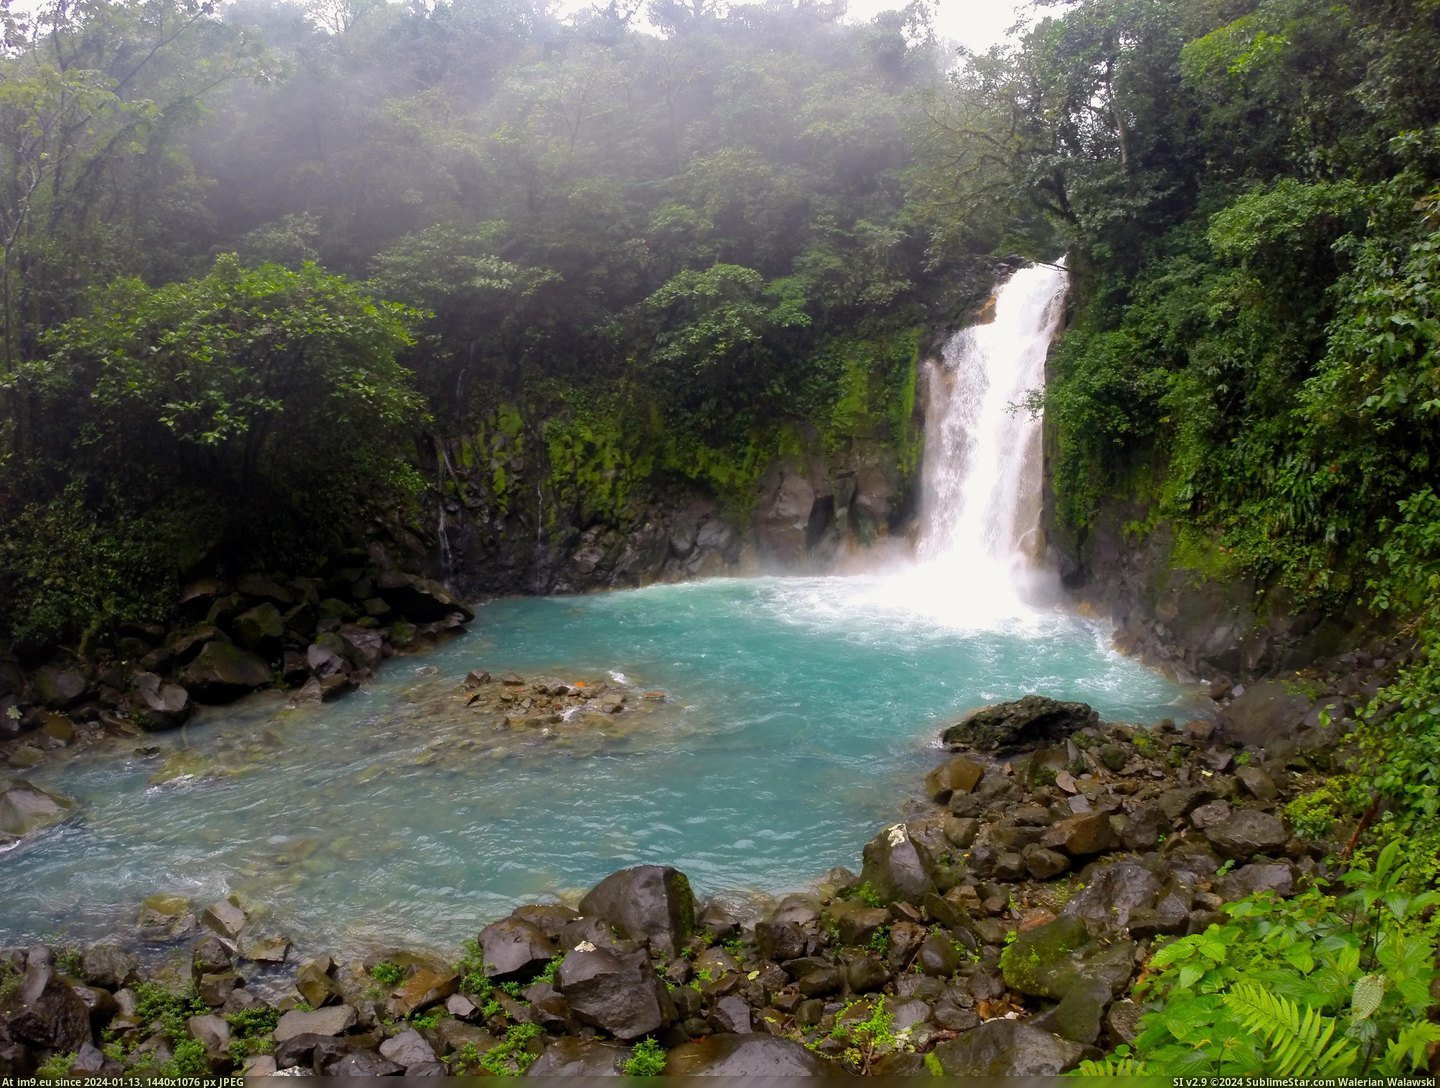 #Morning #Waterfall #4000x3000 #Foggy #Celeste #Rio #Costa #Rica [Earthporn] Foggy morning at Rio Celeste waterfall in Costa Rica  [4000x3000] Pic. (Image of album My r/EARTHPORN favs))